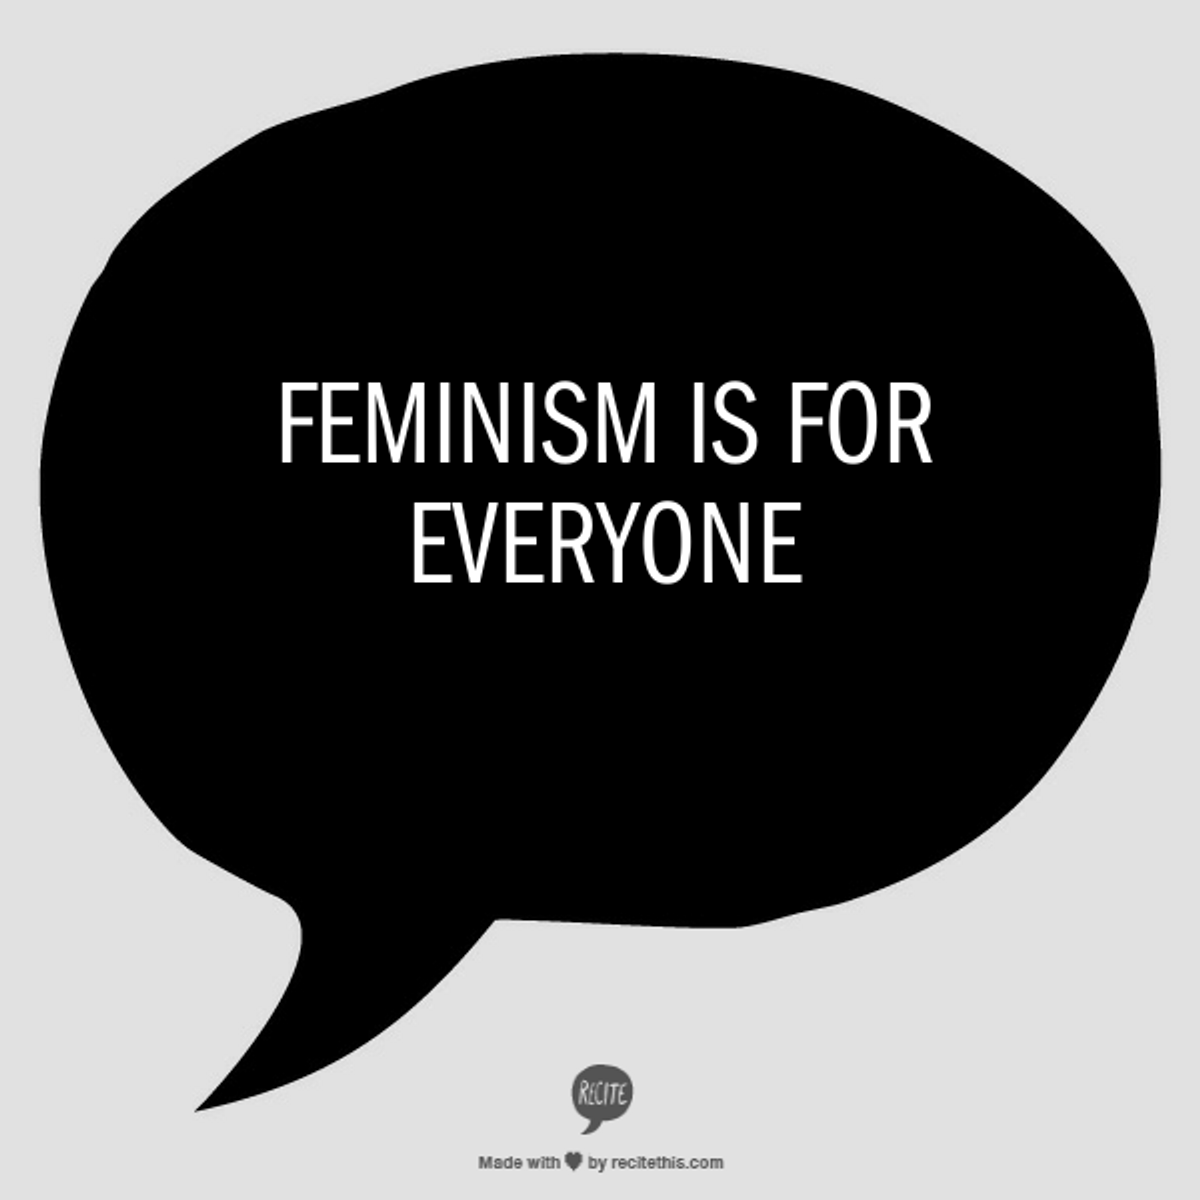 I'm a 20 year old man and I think everyone should be a feminist